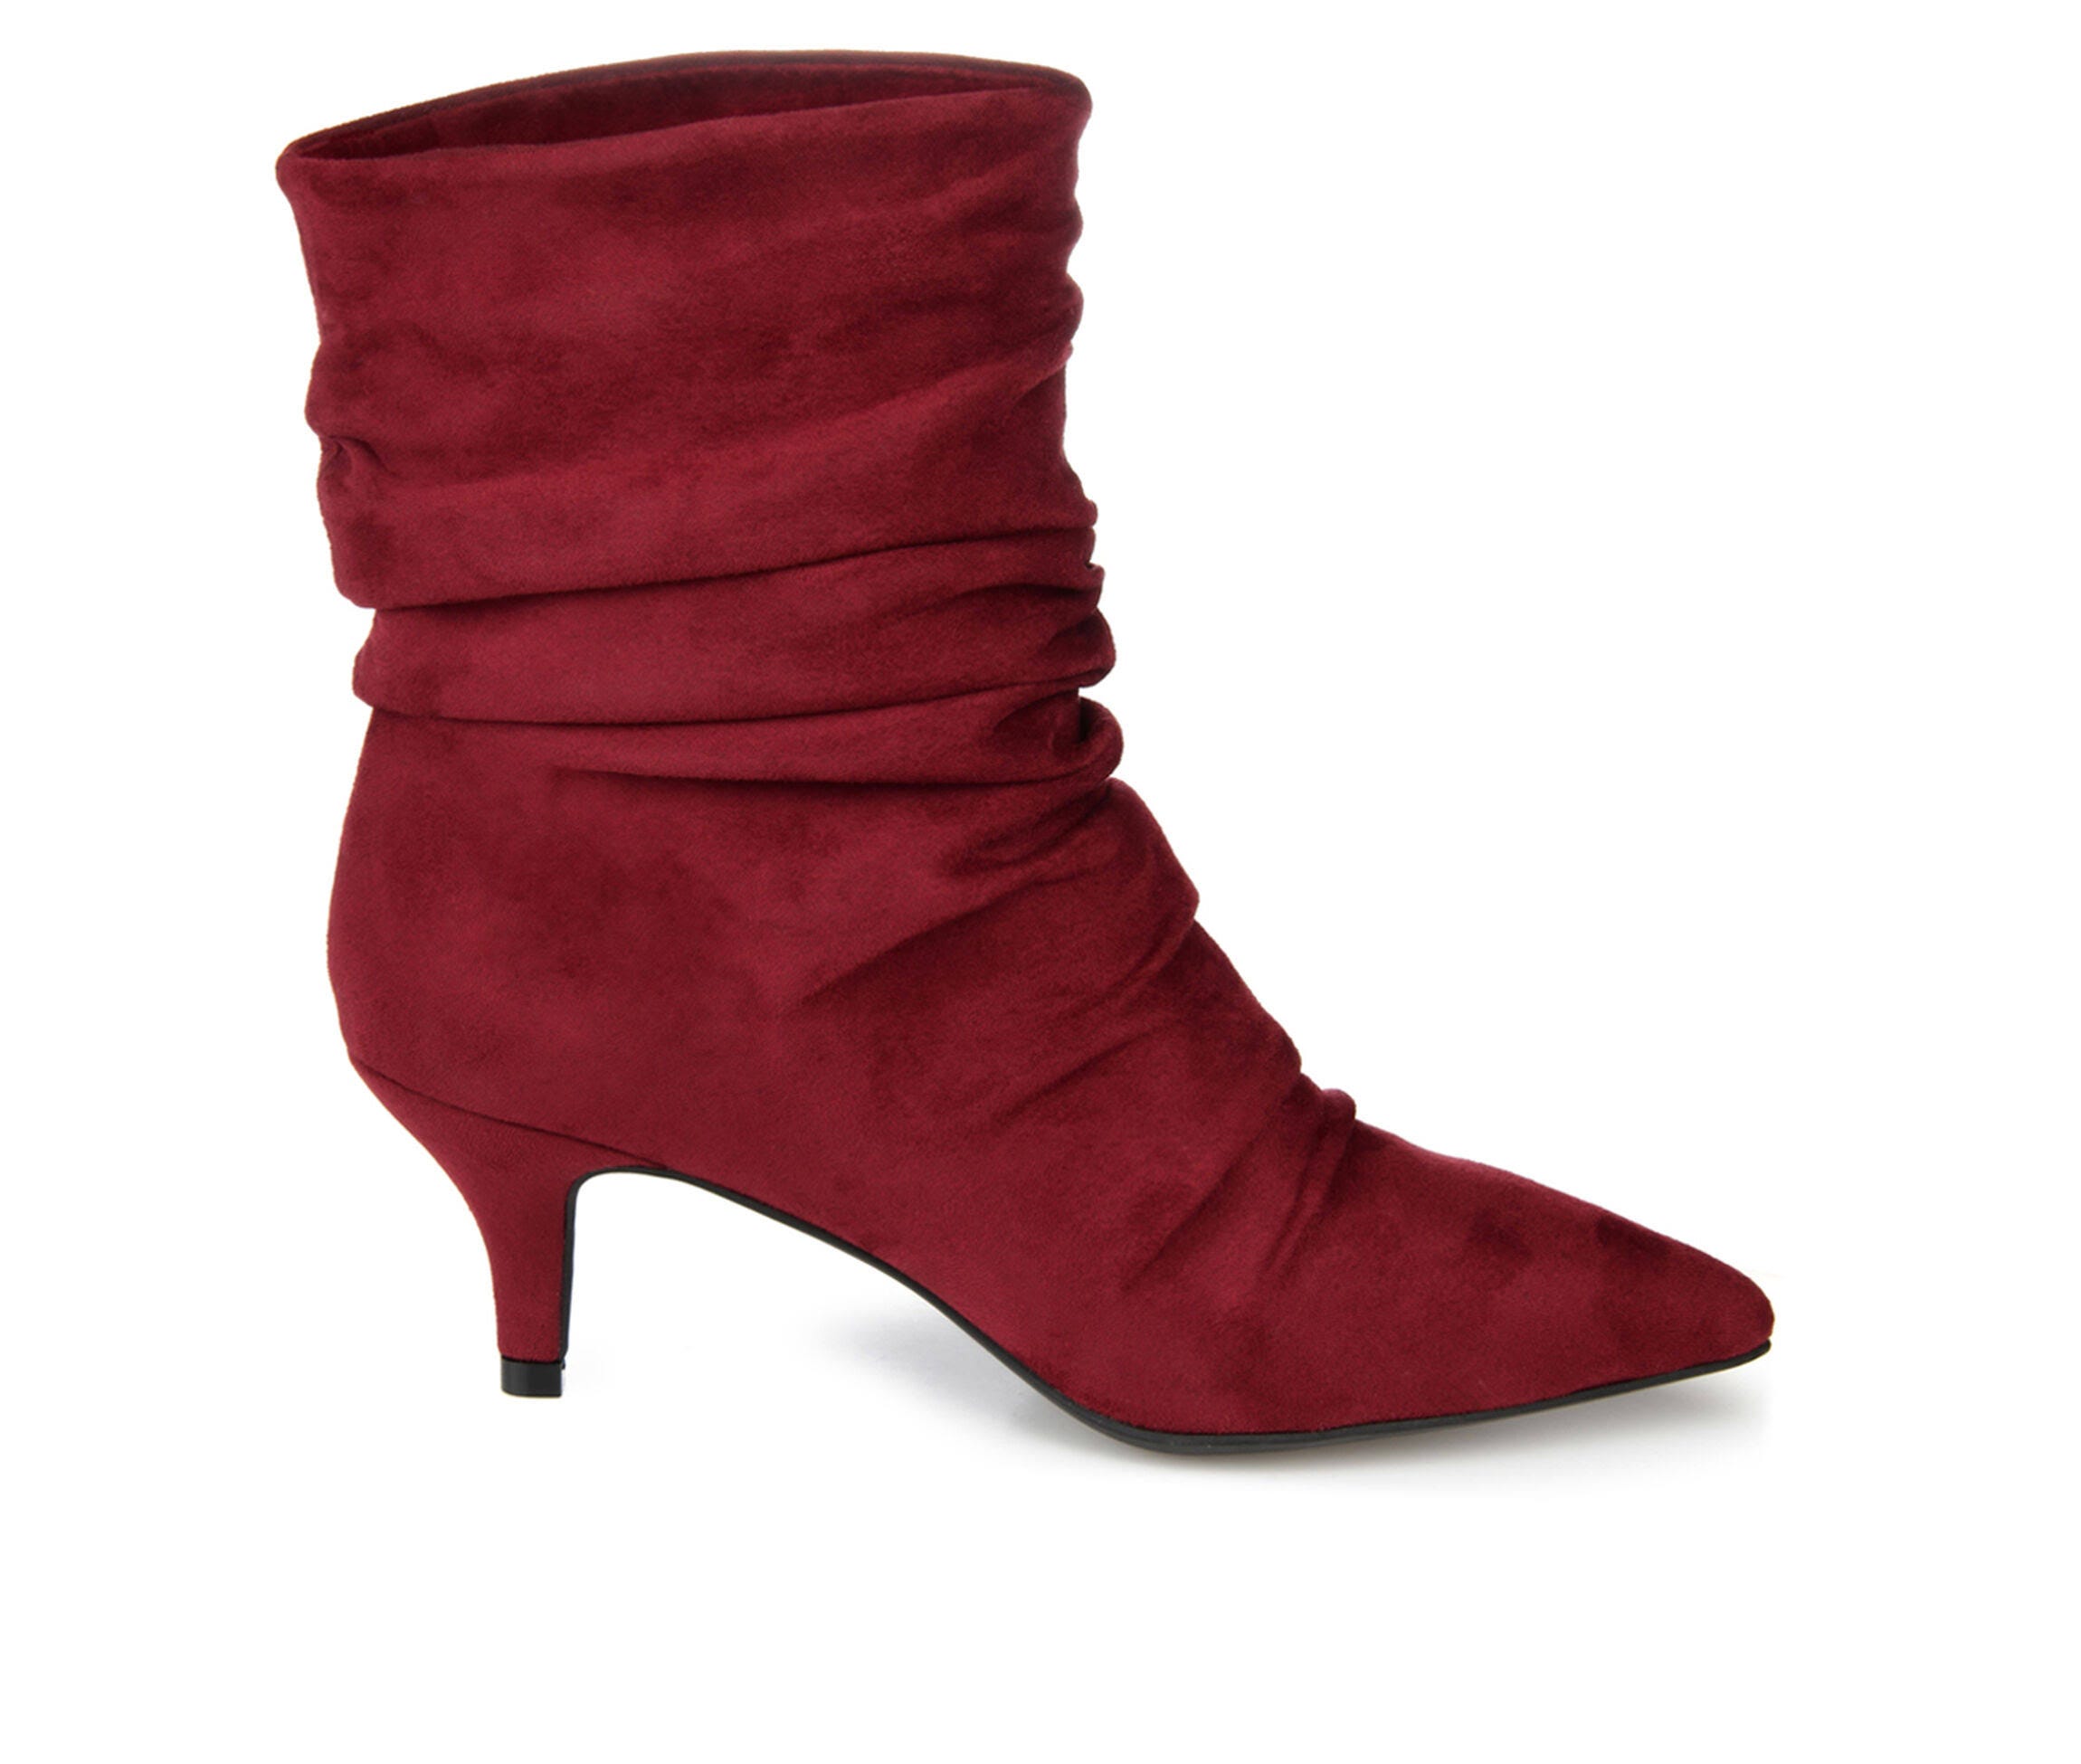 Sophisticated Faux Suede Heels for Women | Image